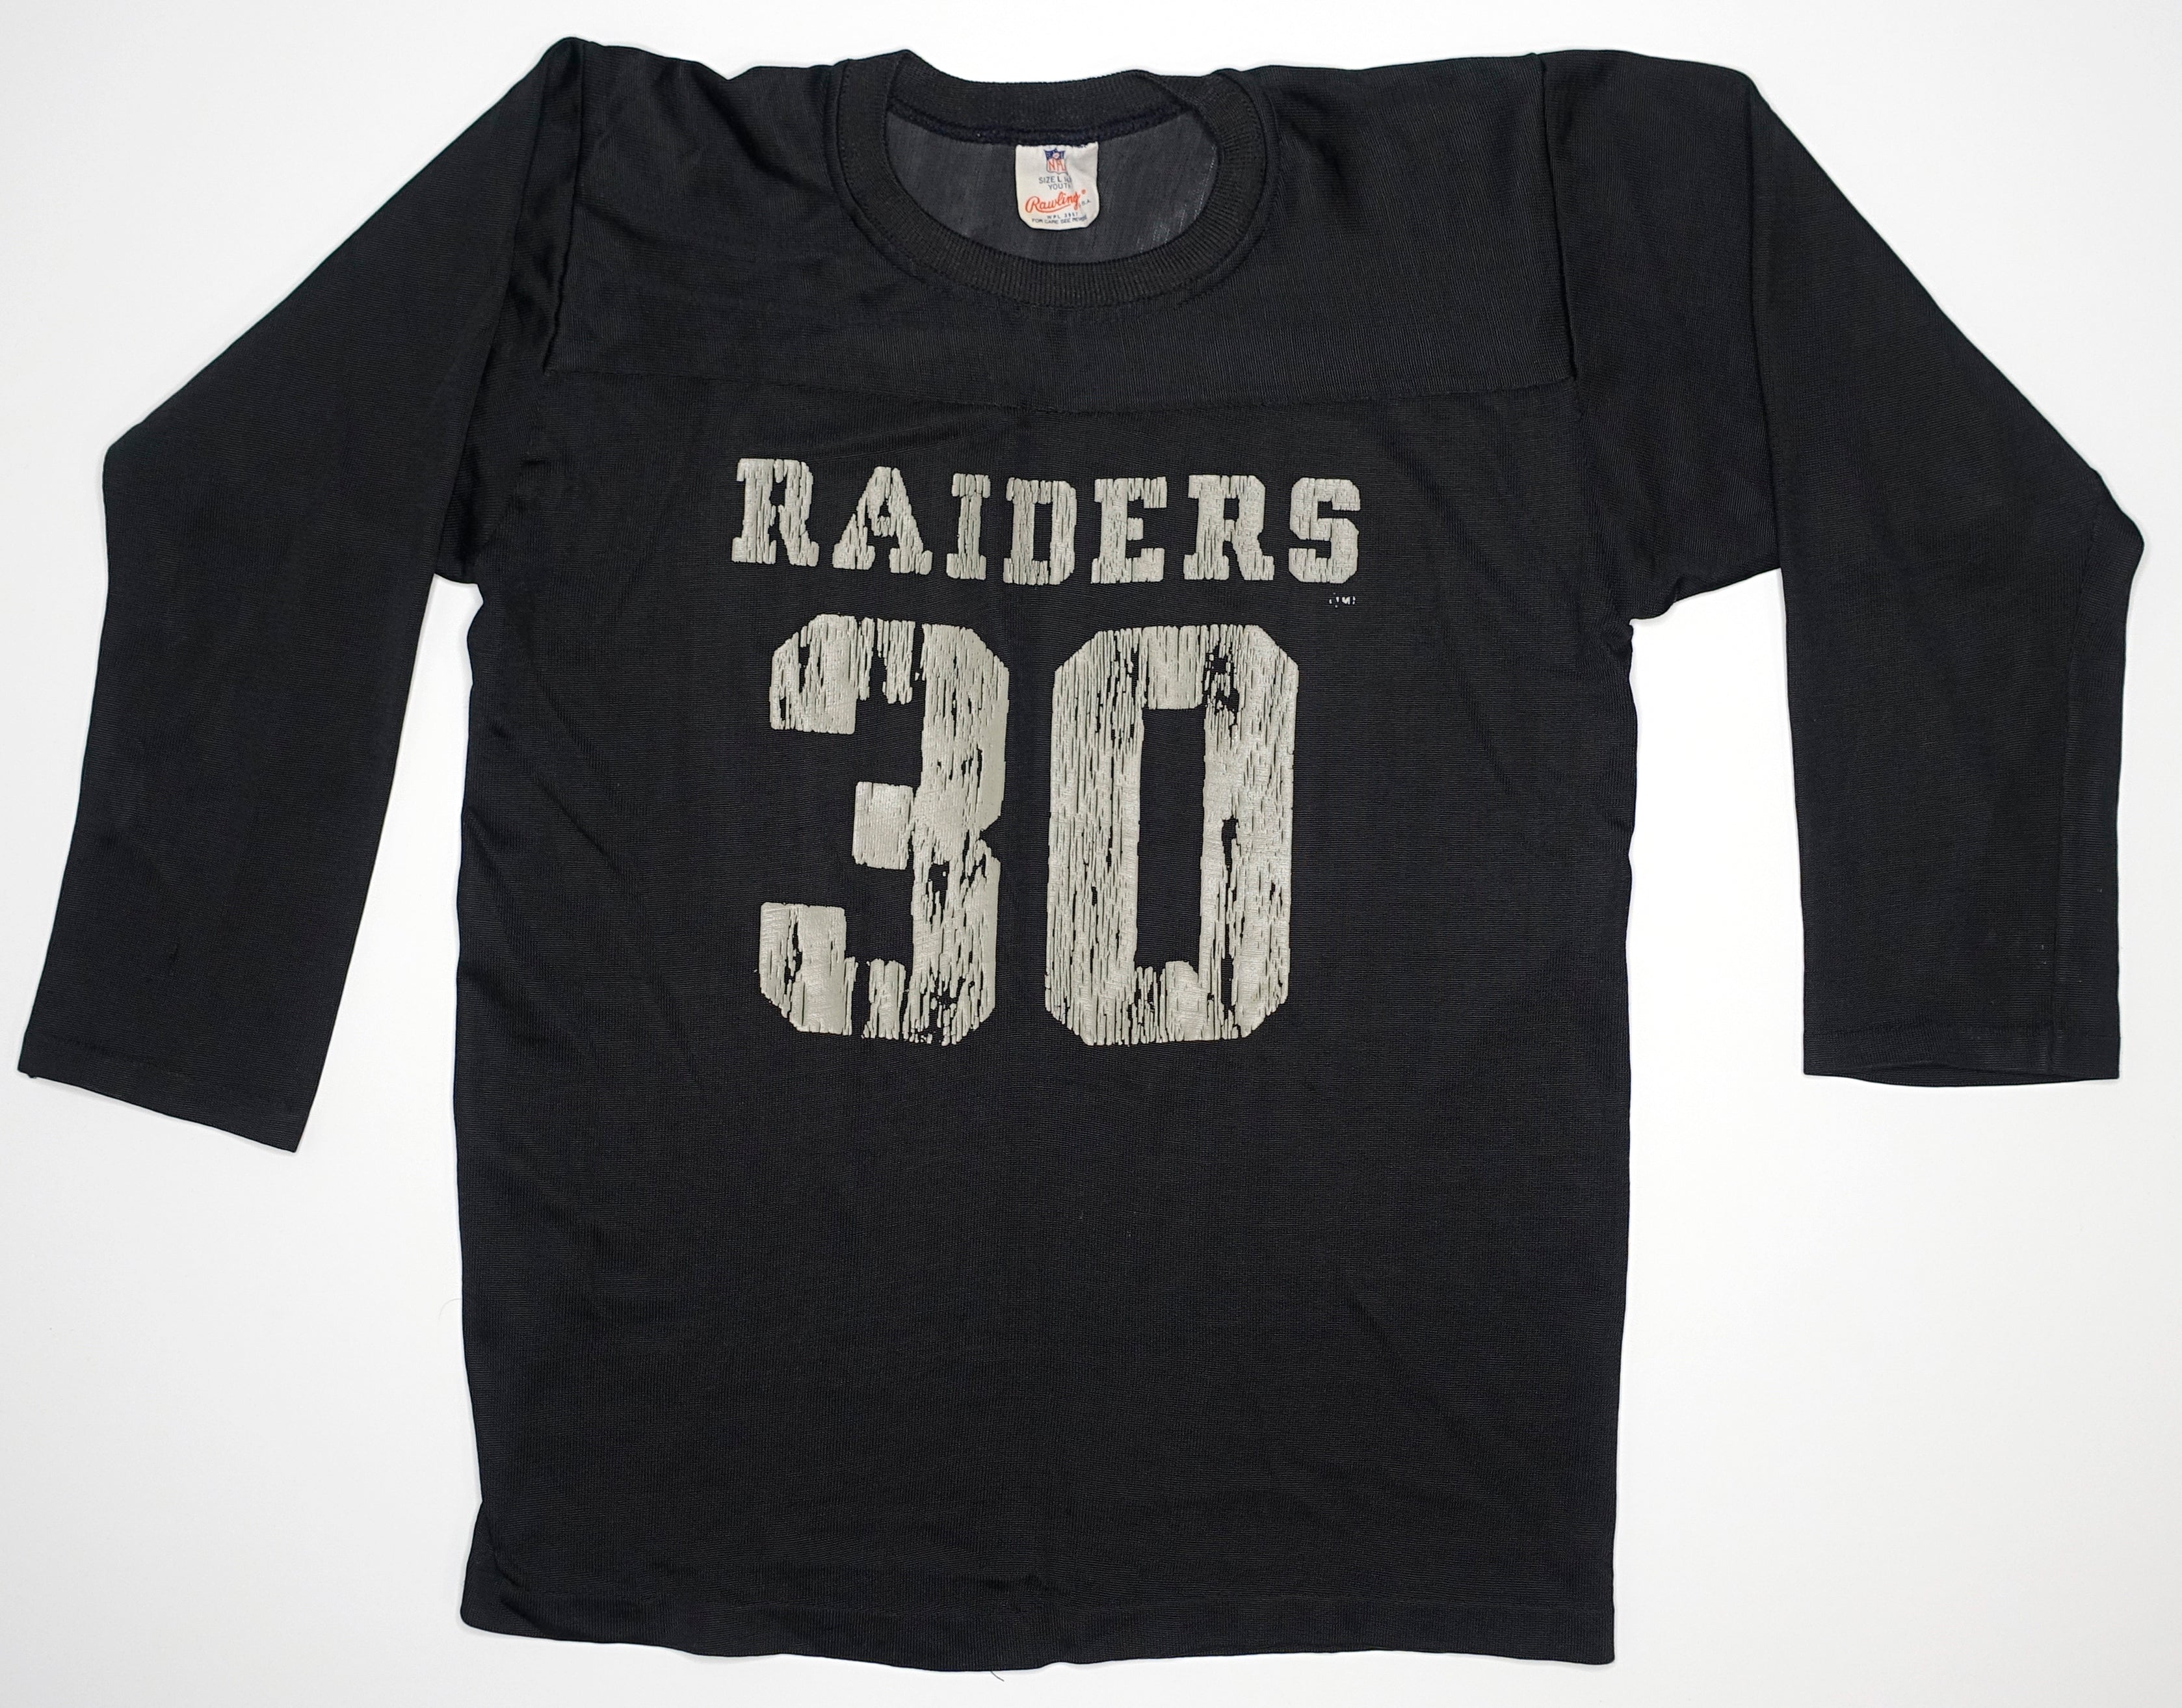 Los Angeles Raiders - Jersey Size Small